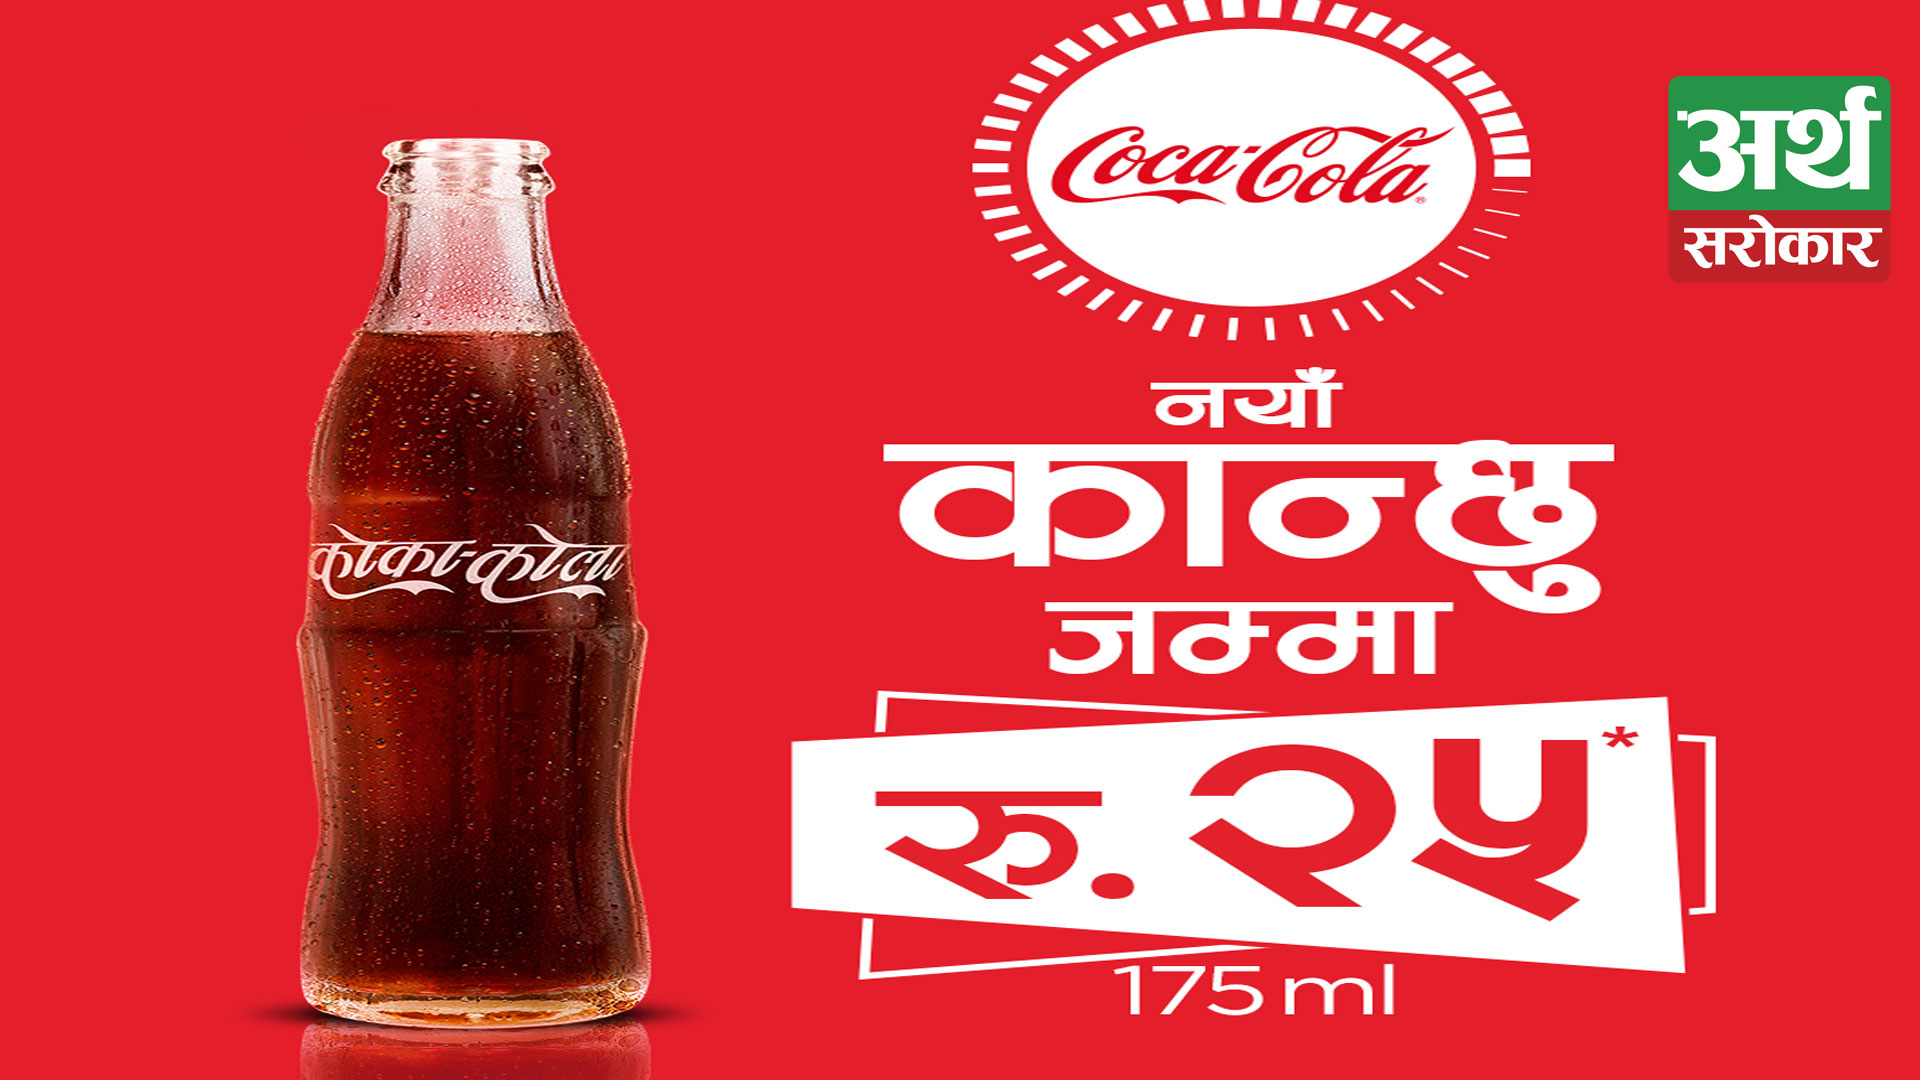 Coca-Cola’s youngest and most affordable glass bottle “Kanchu pack” now available across Nepal